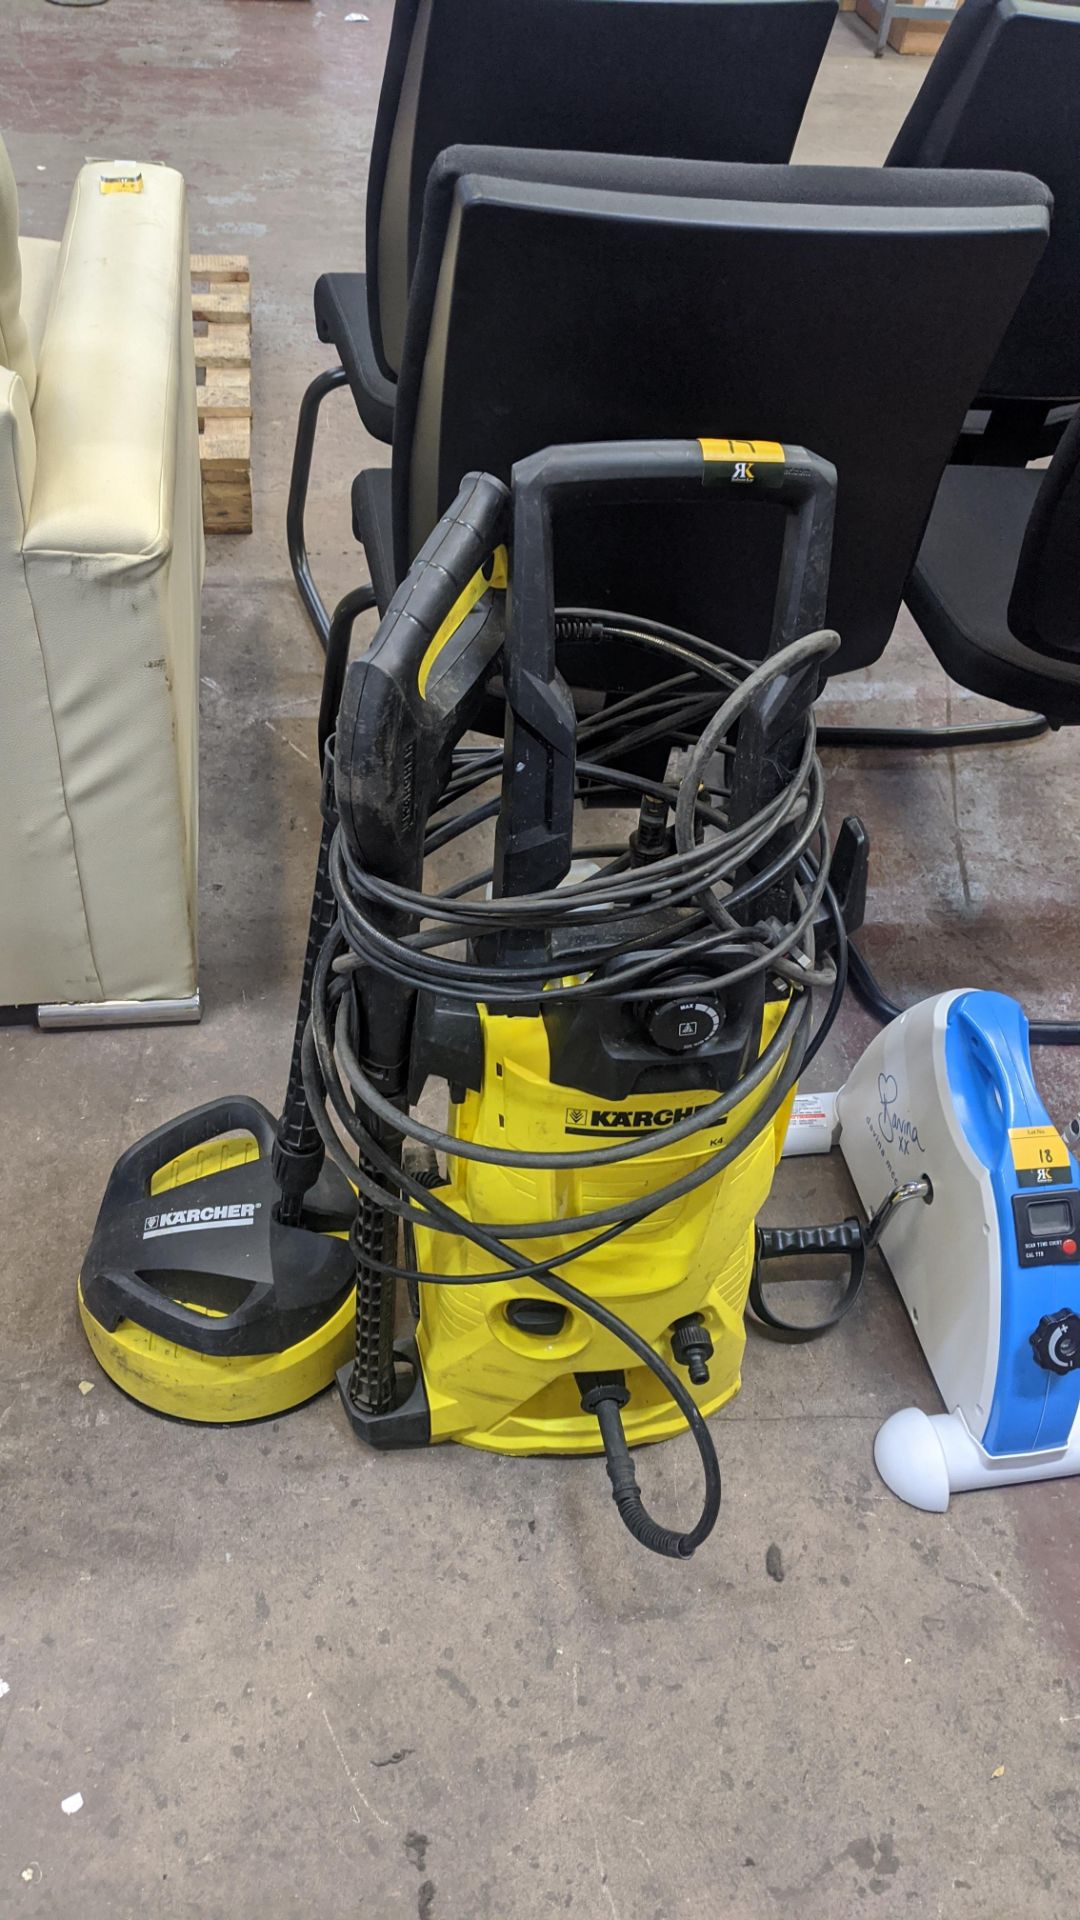 Karcher K4 pressure washer with patio cleaner optional accessory. IMPORTANT: This auction is